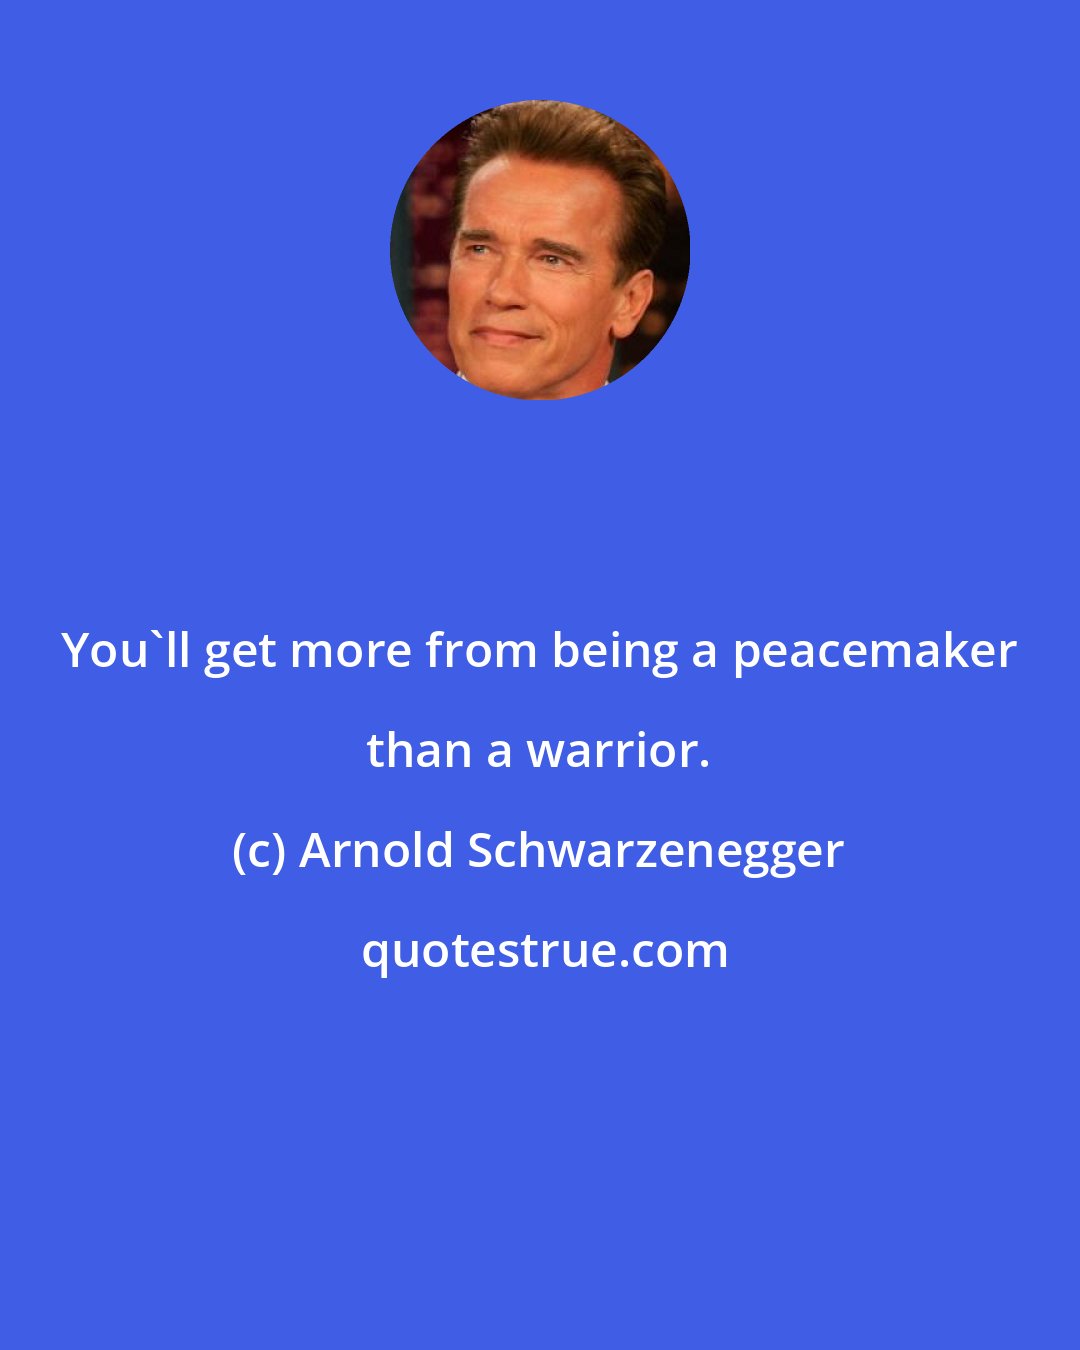 Arnold Schwarzenegger: You'll get more from being a peacemaker than a warrior.